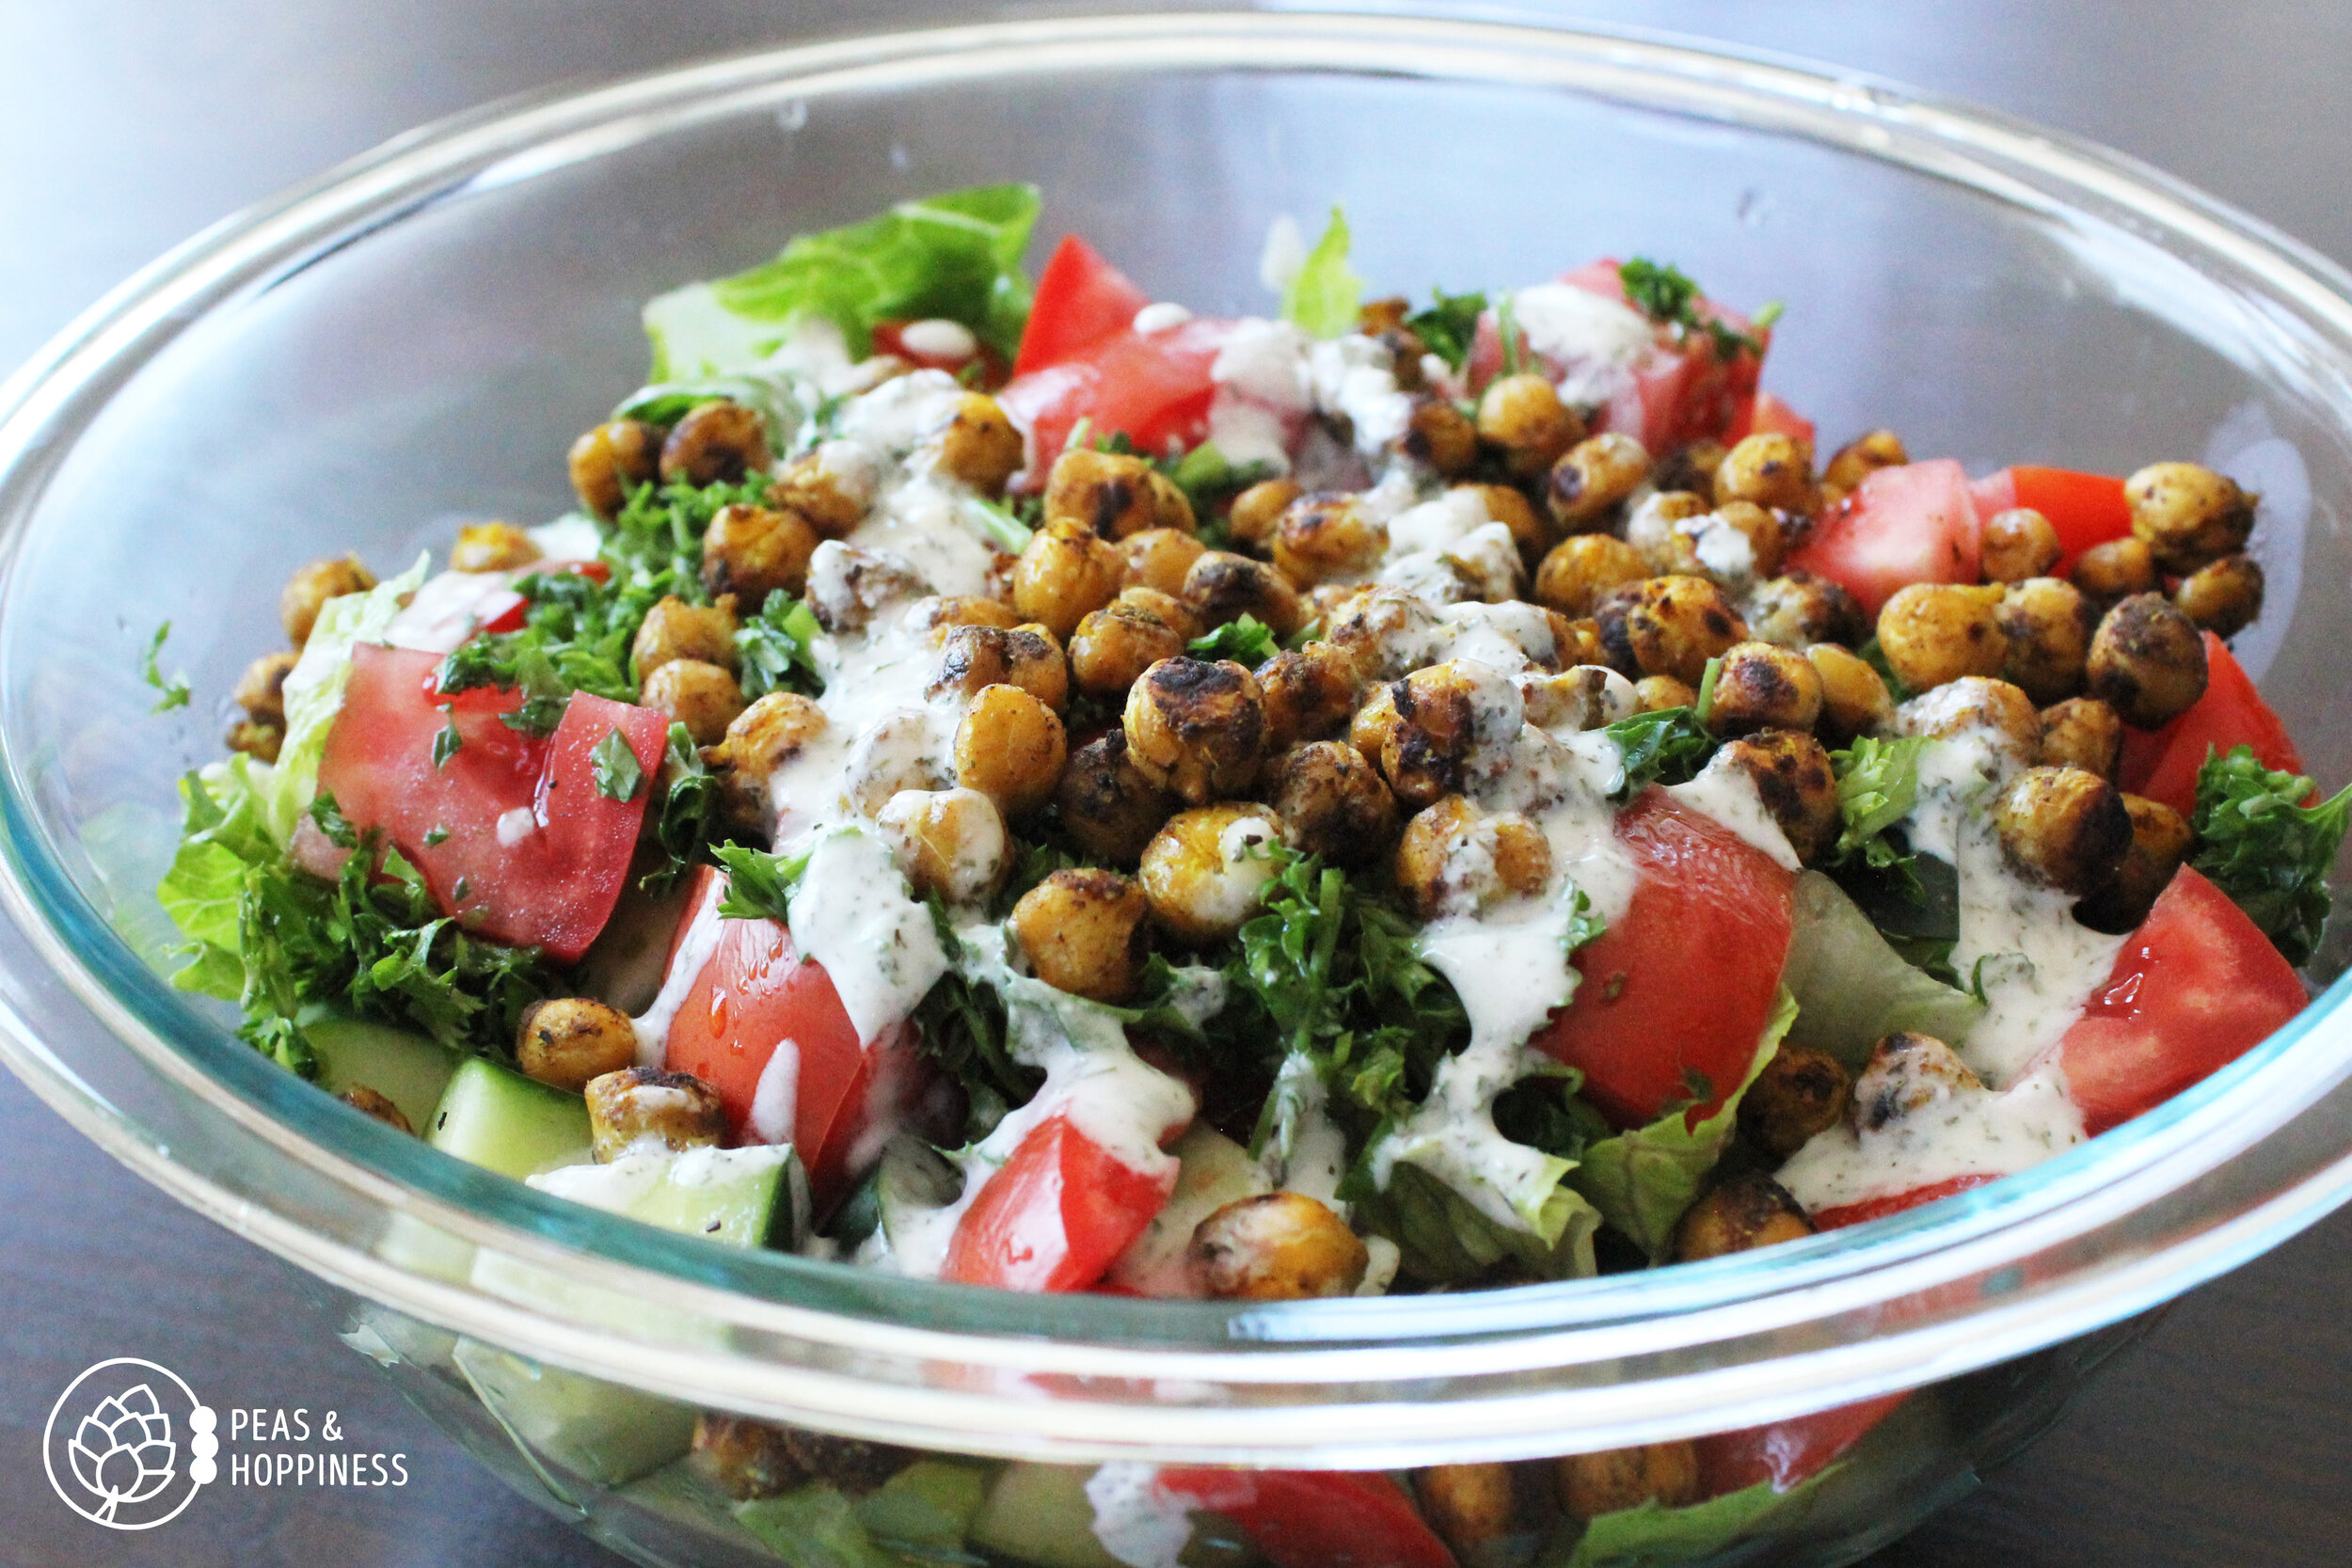 Using chickpeas in place of meat is a delicious, protein-filled way to eat lower on the food chain and reduce the environmental impact of one’s diet. Chickpea Shawarma Bowls featured on the Vegetarian Peas &amp; Hoppy Meal Guide